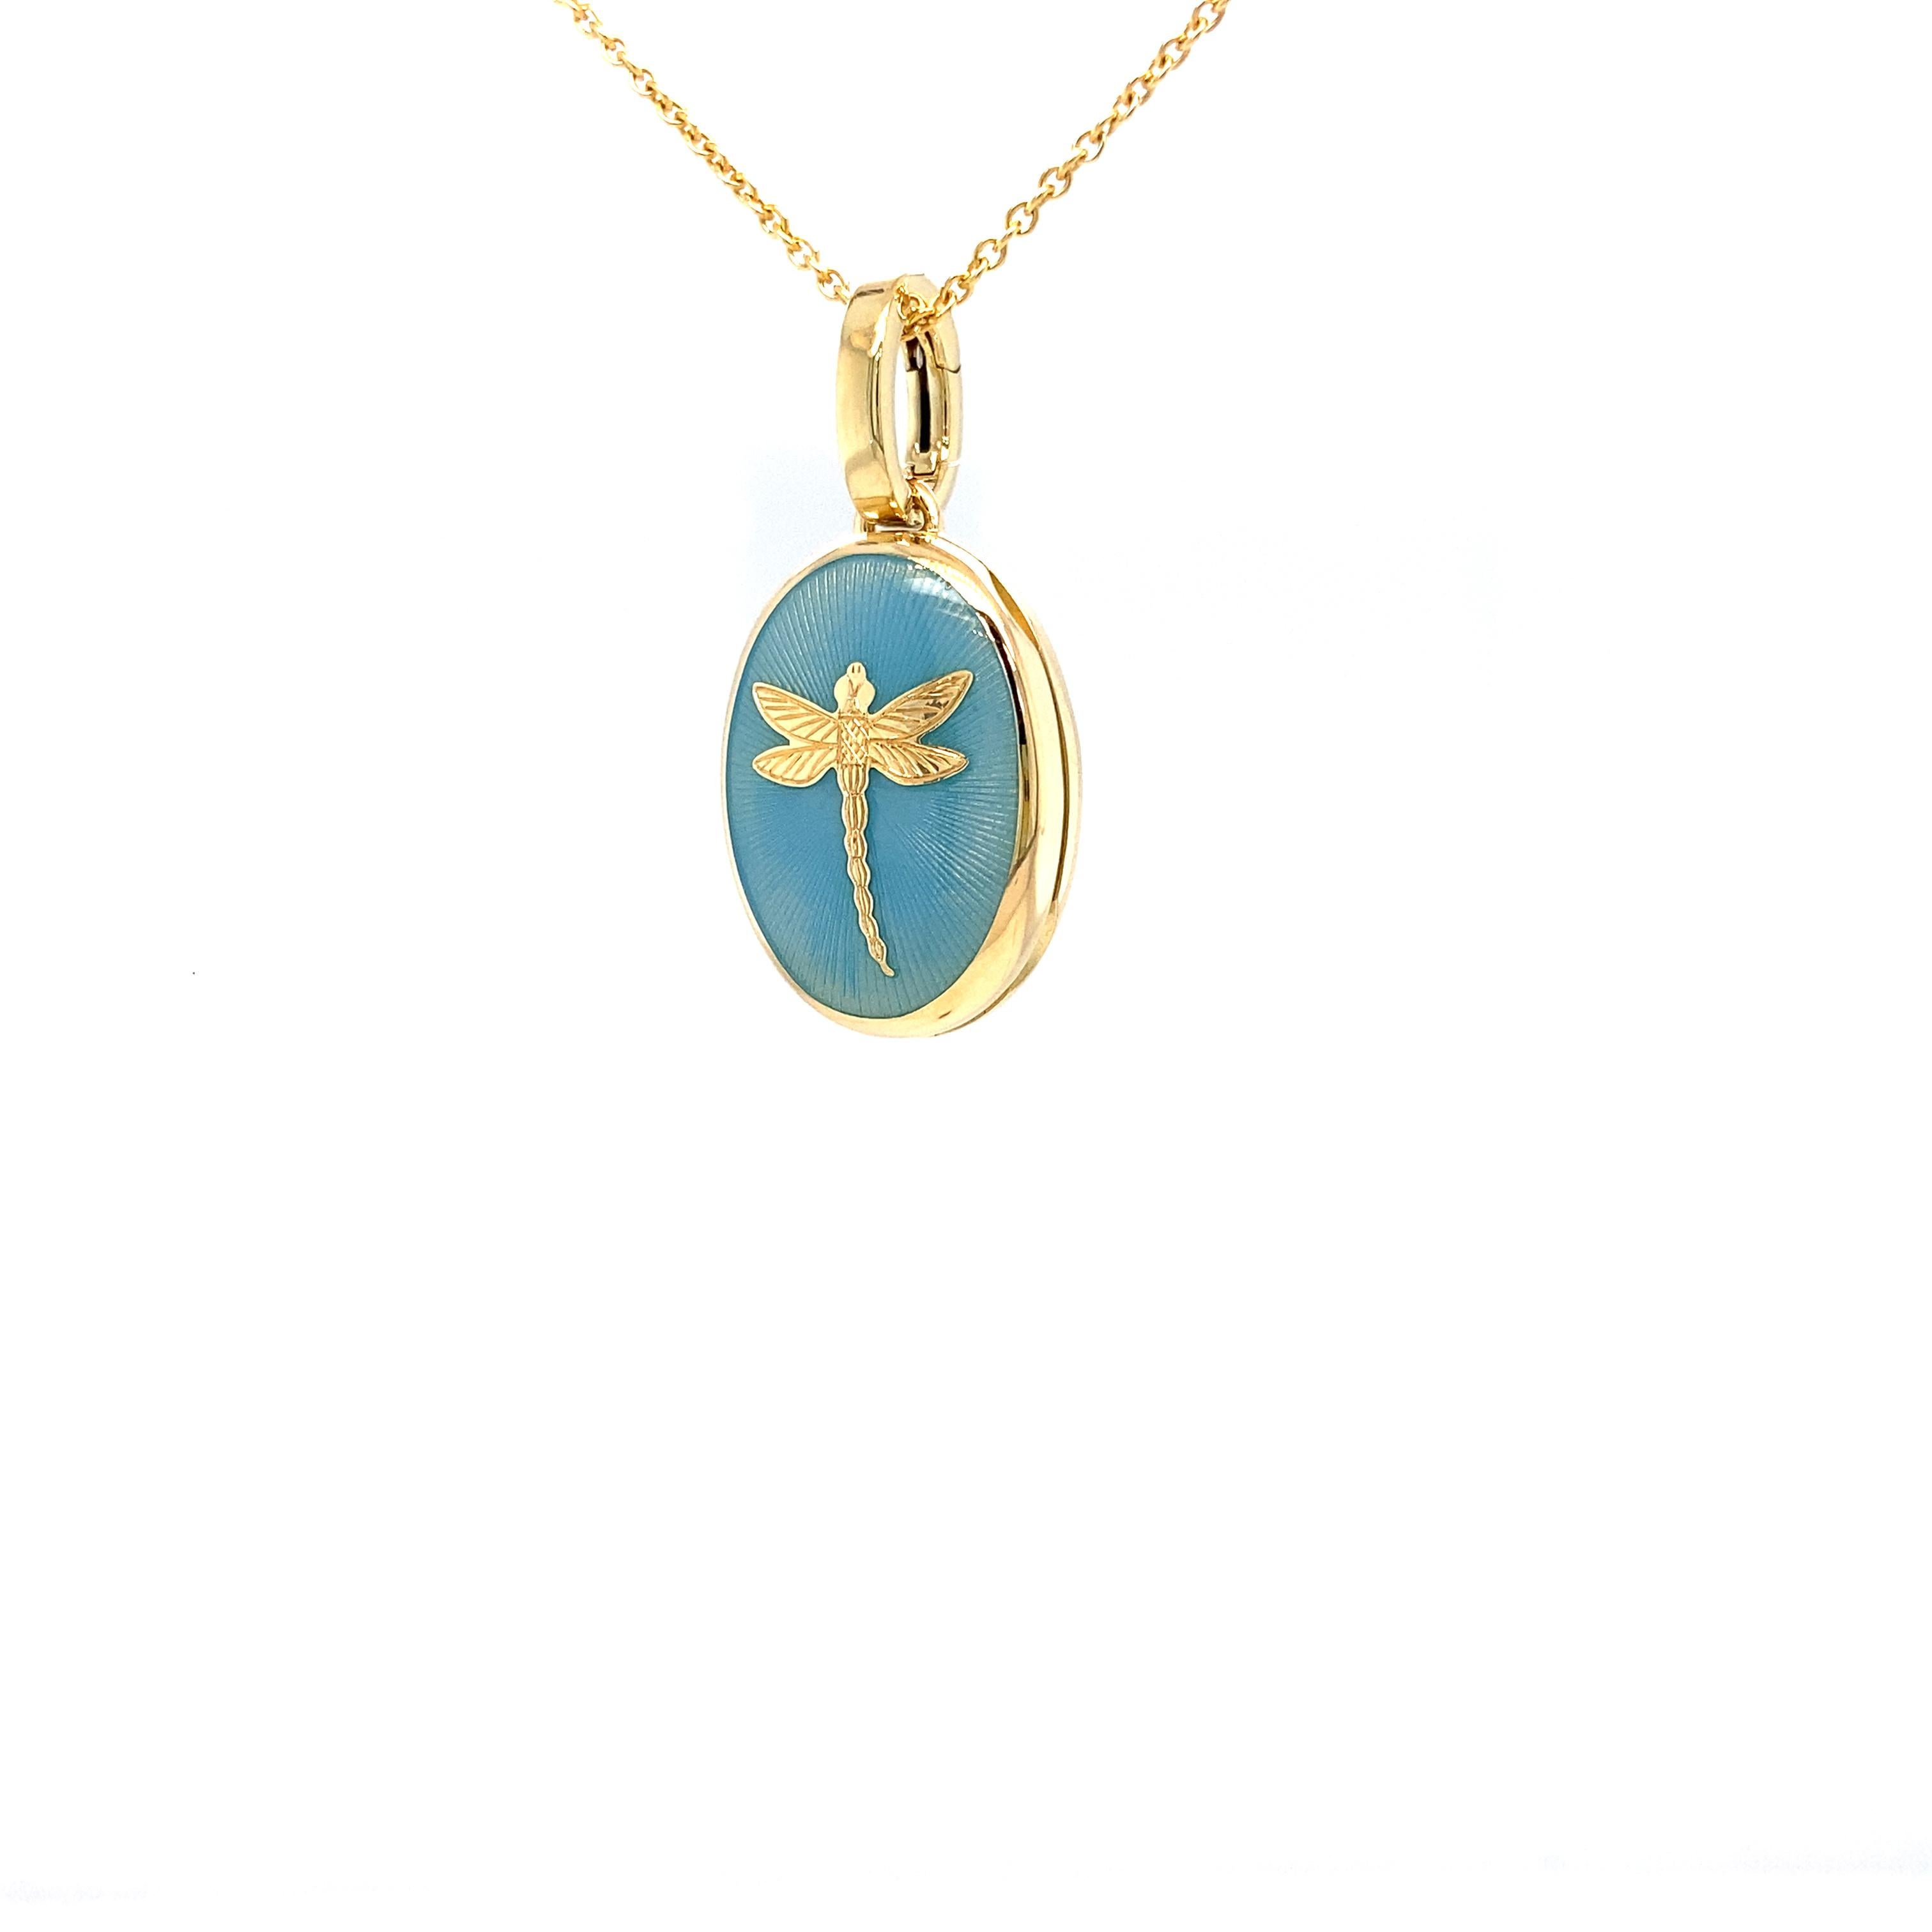 Oval Locket Pendant Dragonfly 18k Yellow Gold Opalescent Turquoise Enamel For Sale 2